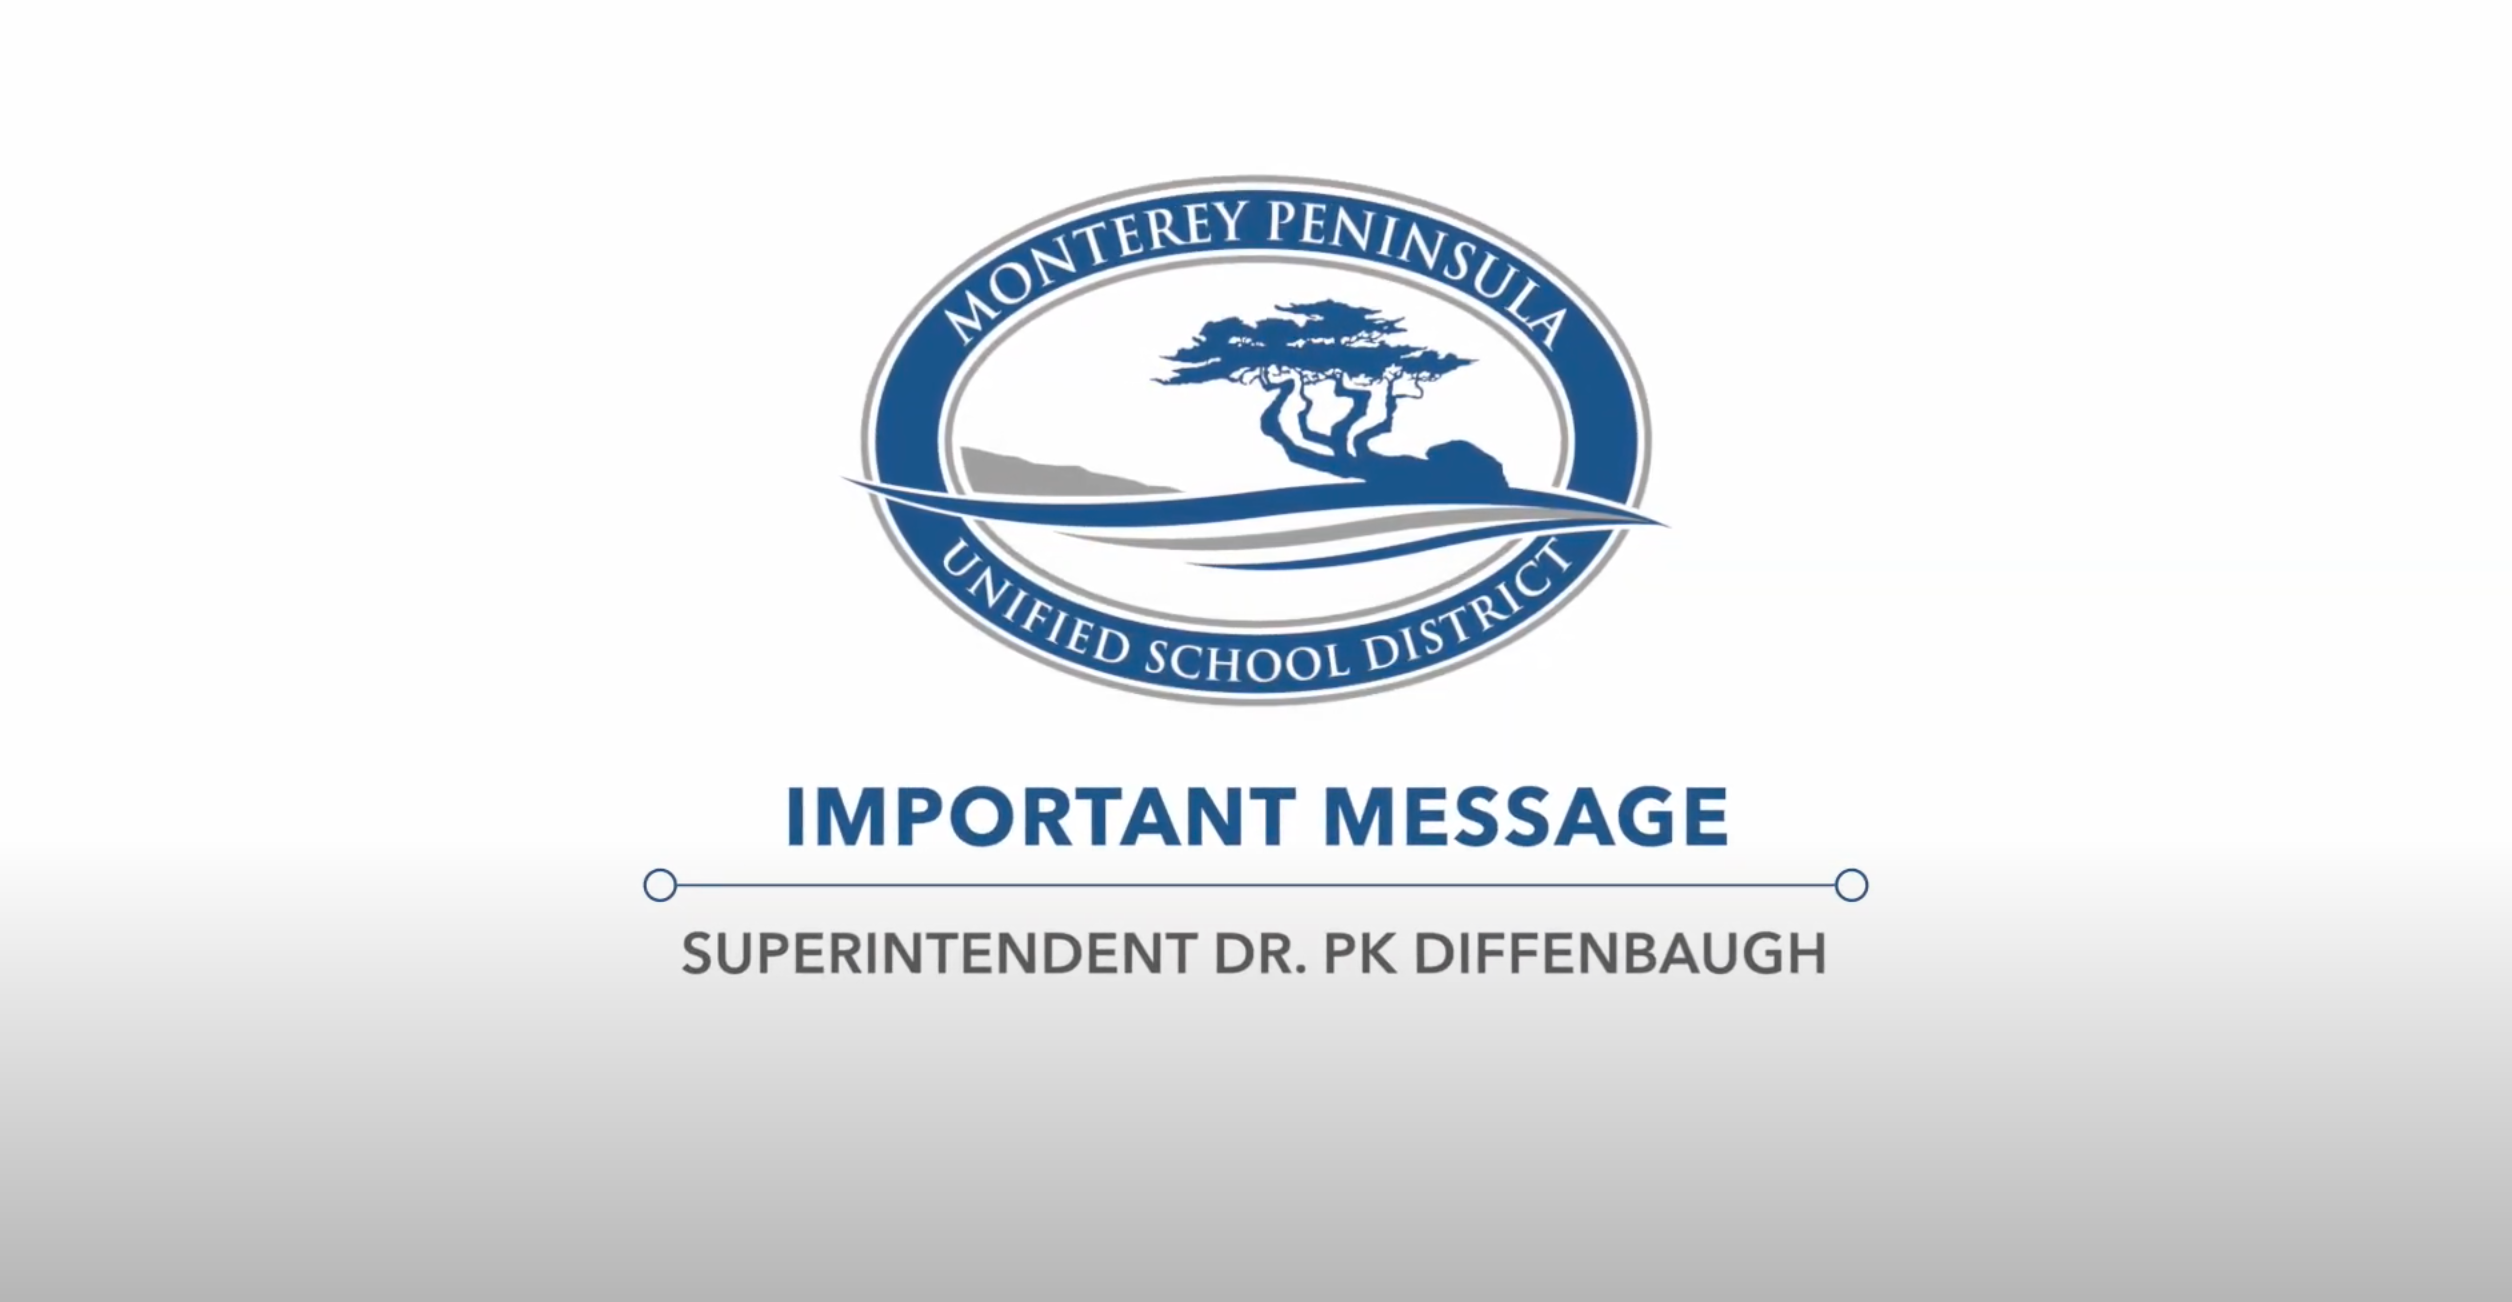 Video Message from the Superintendent